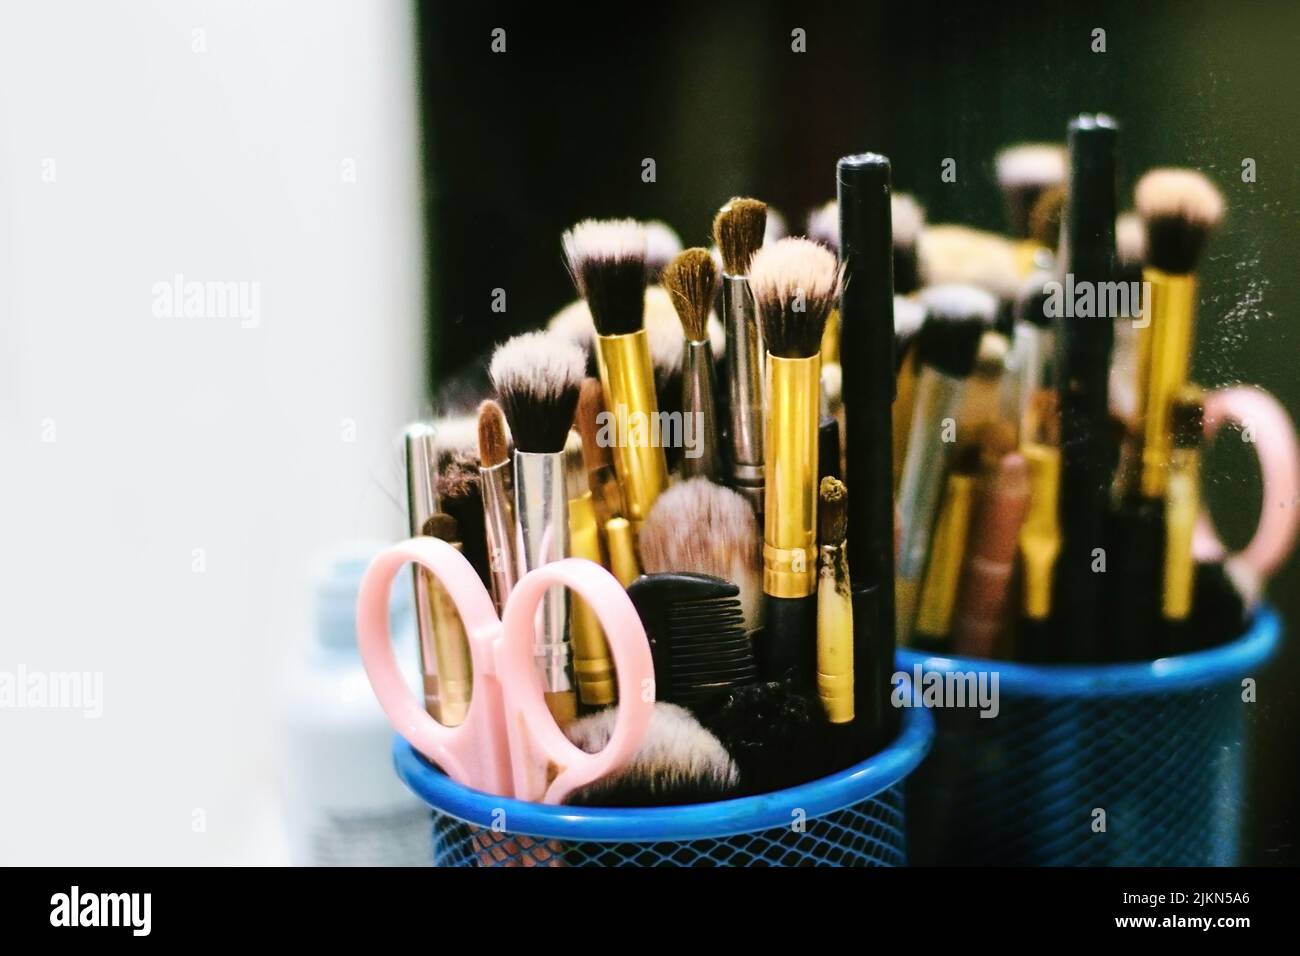 A closeup shot of a set of makeup brushes, scissors, and comb reflected on the mirror Stock Photo